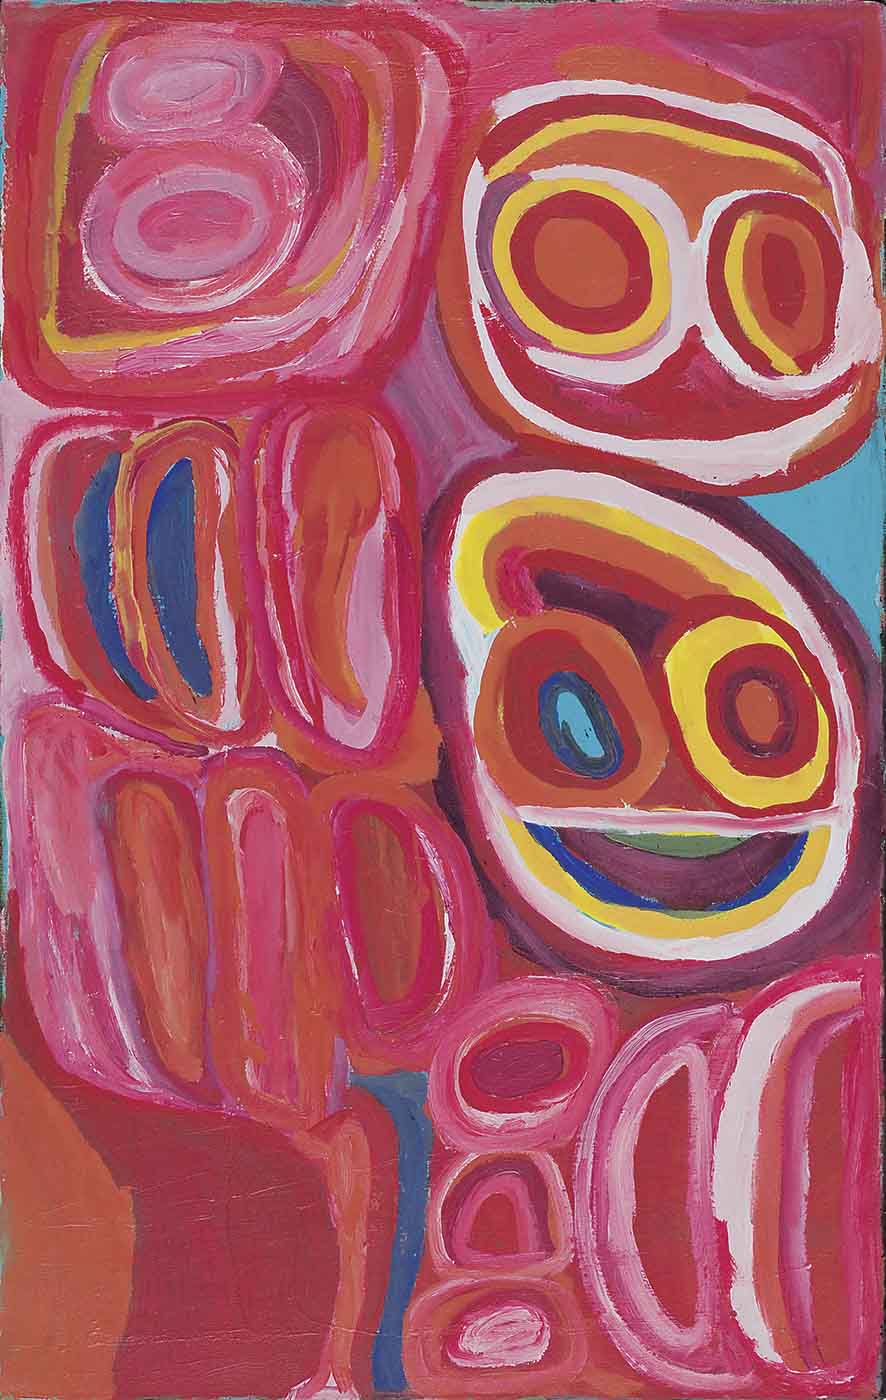 Sunday Well 2008 by Dadda Samson, Martumili Artists. Acrylic on canvas. - click to view larger image